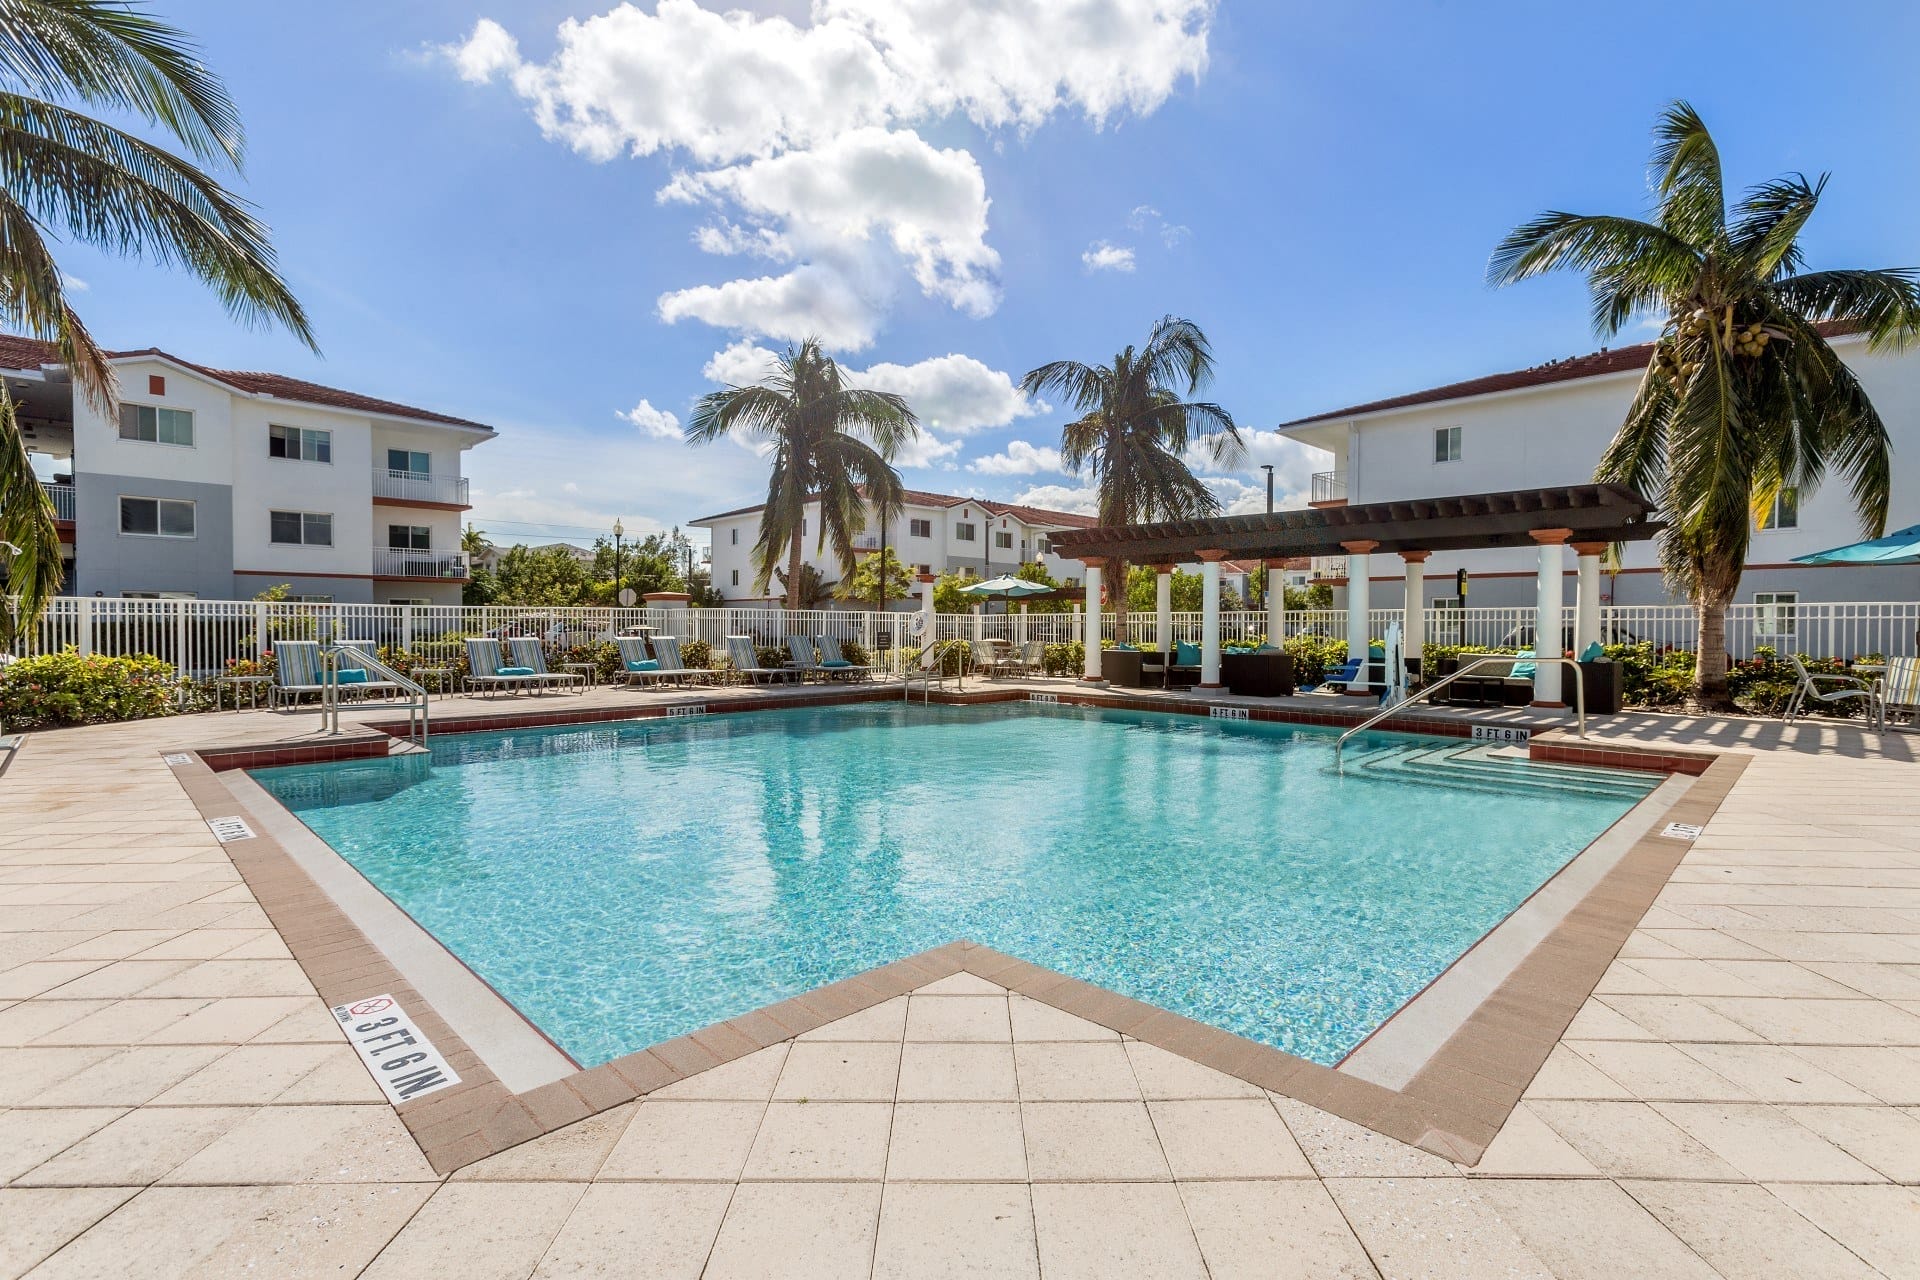 Pool and Sundeck at Windsor Biscayne Shores, Apartments for rent in North Miami